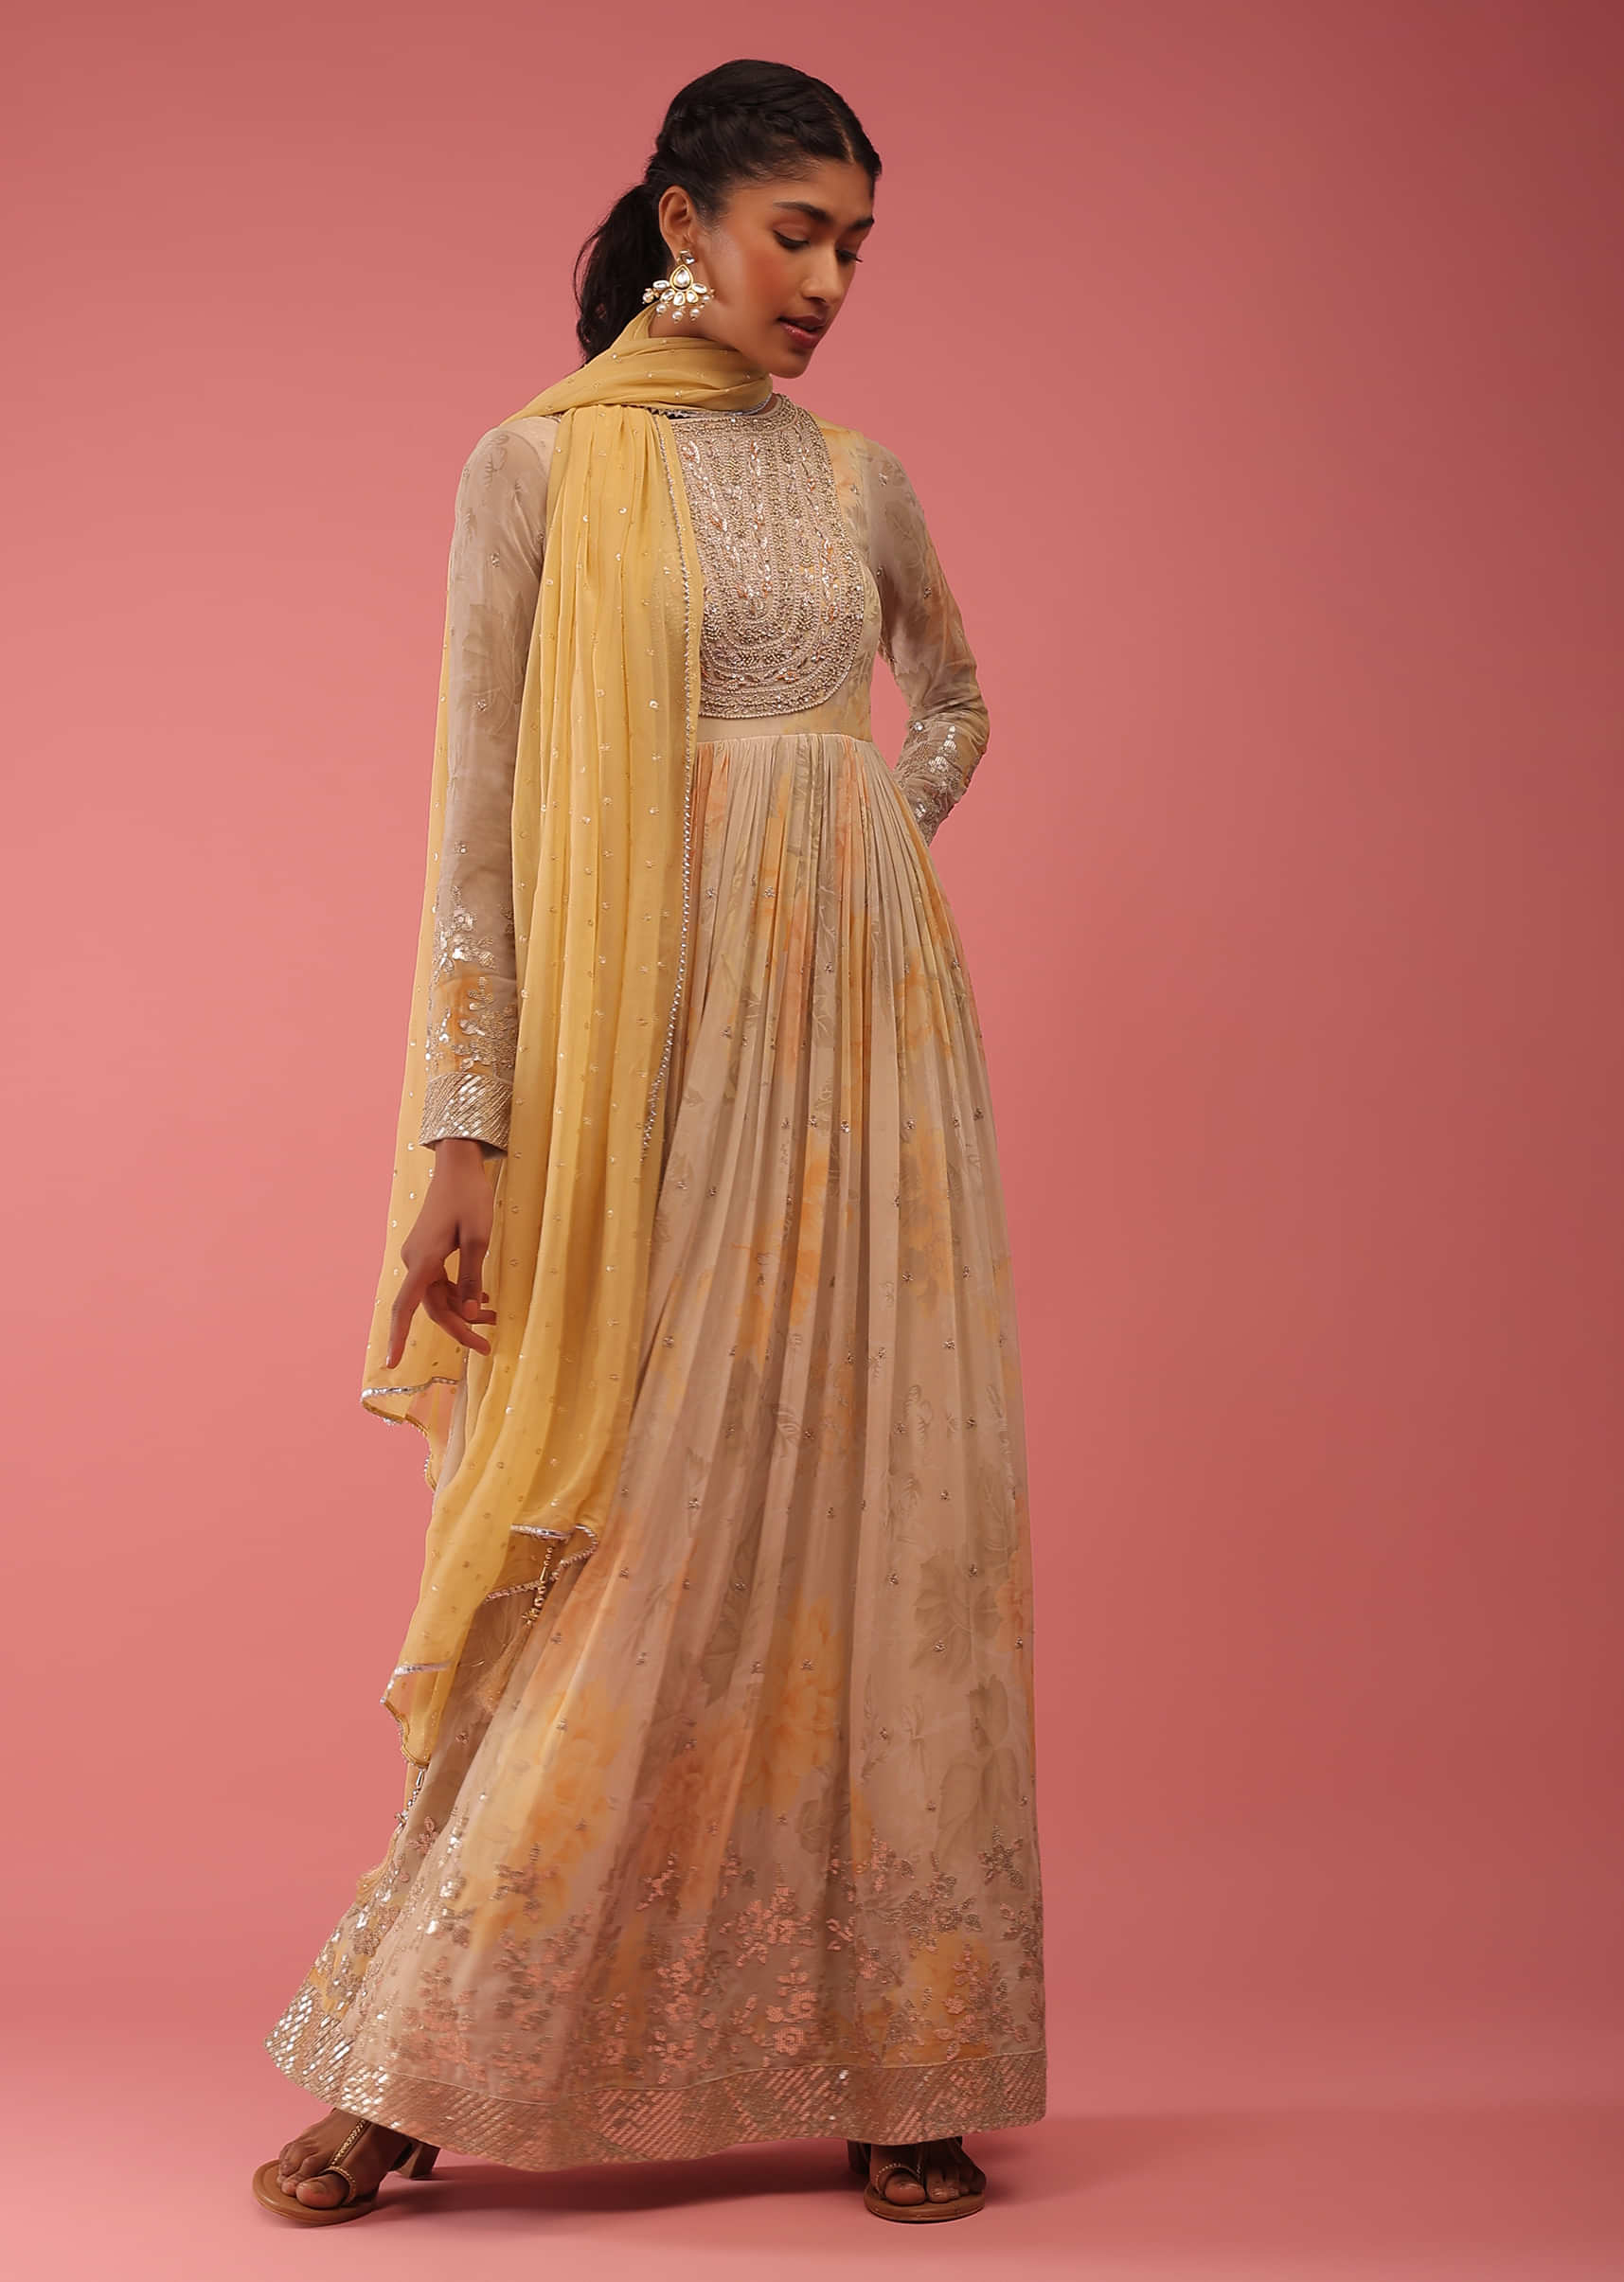 Daffodil Yellow Anarkali Suit With Sequin Embroidery And A Multicolor Floral Print